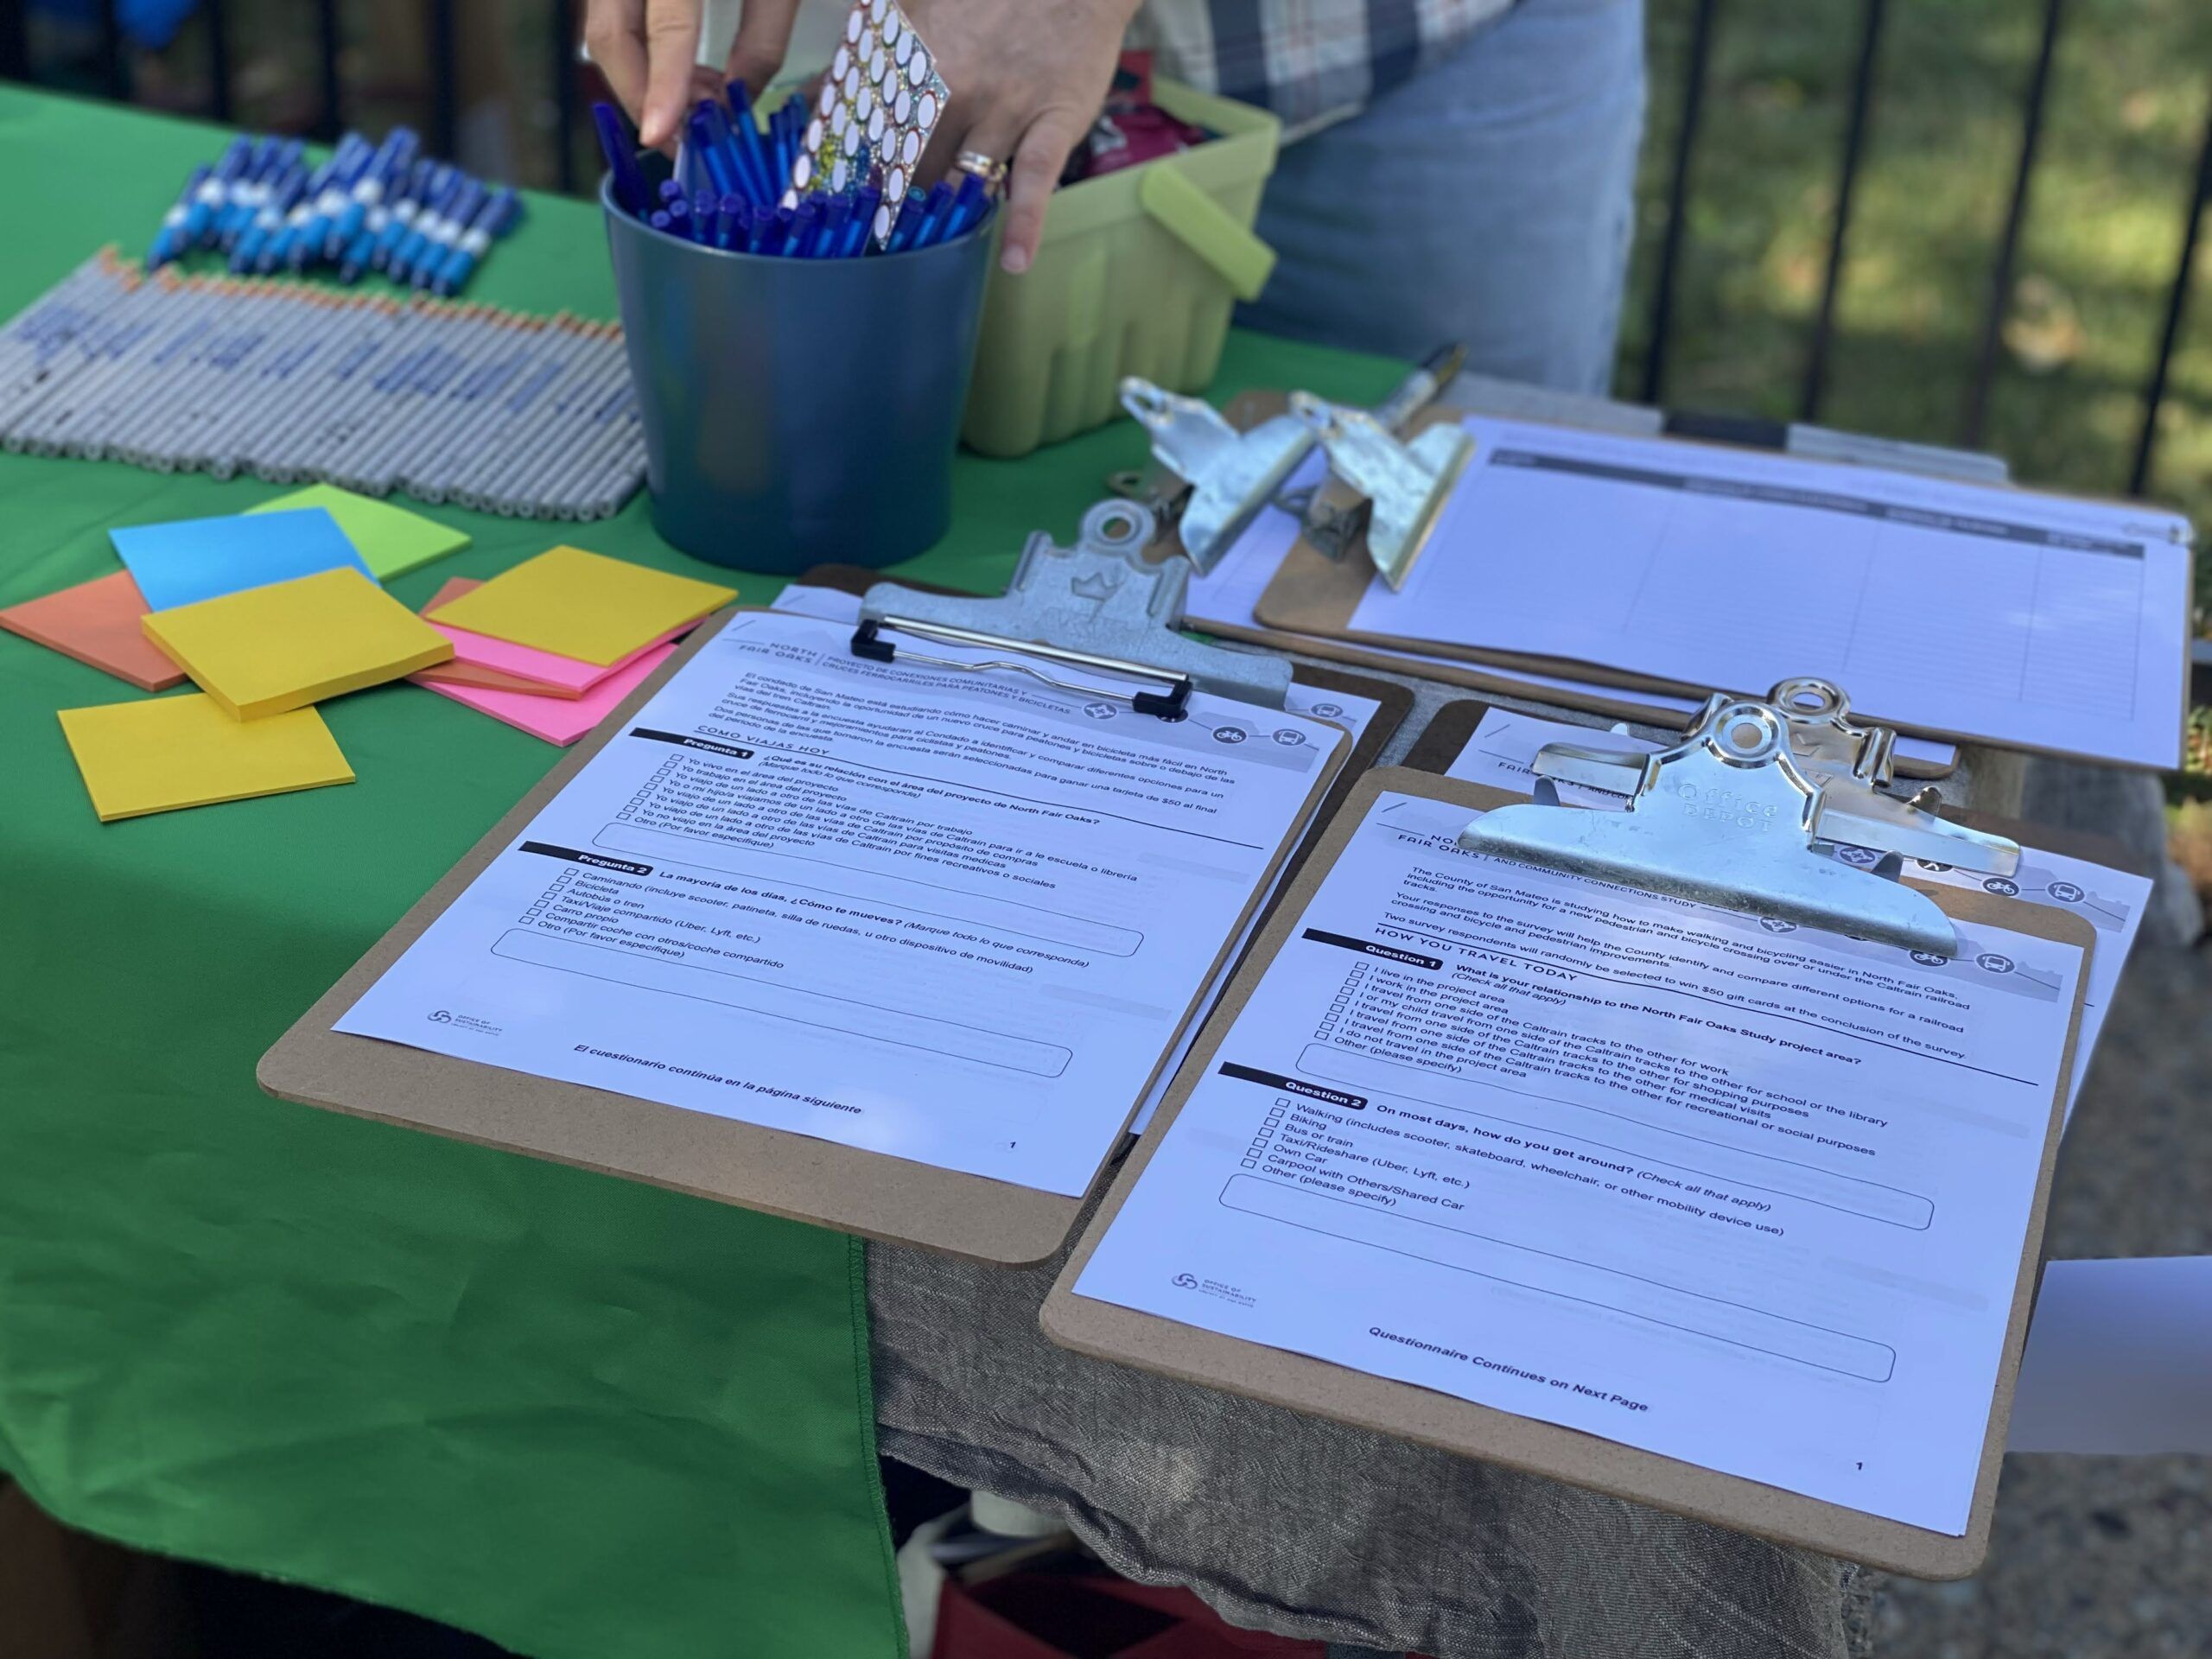 Table outside wiht clipboards and note papers for community members to share their feedback